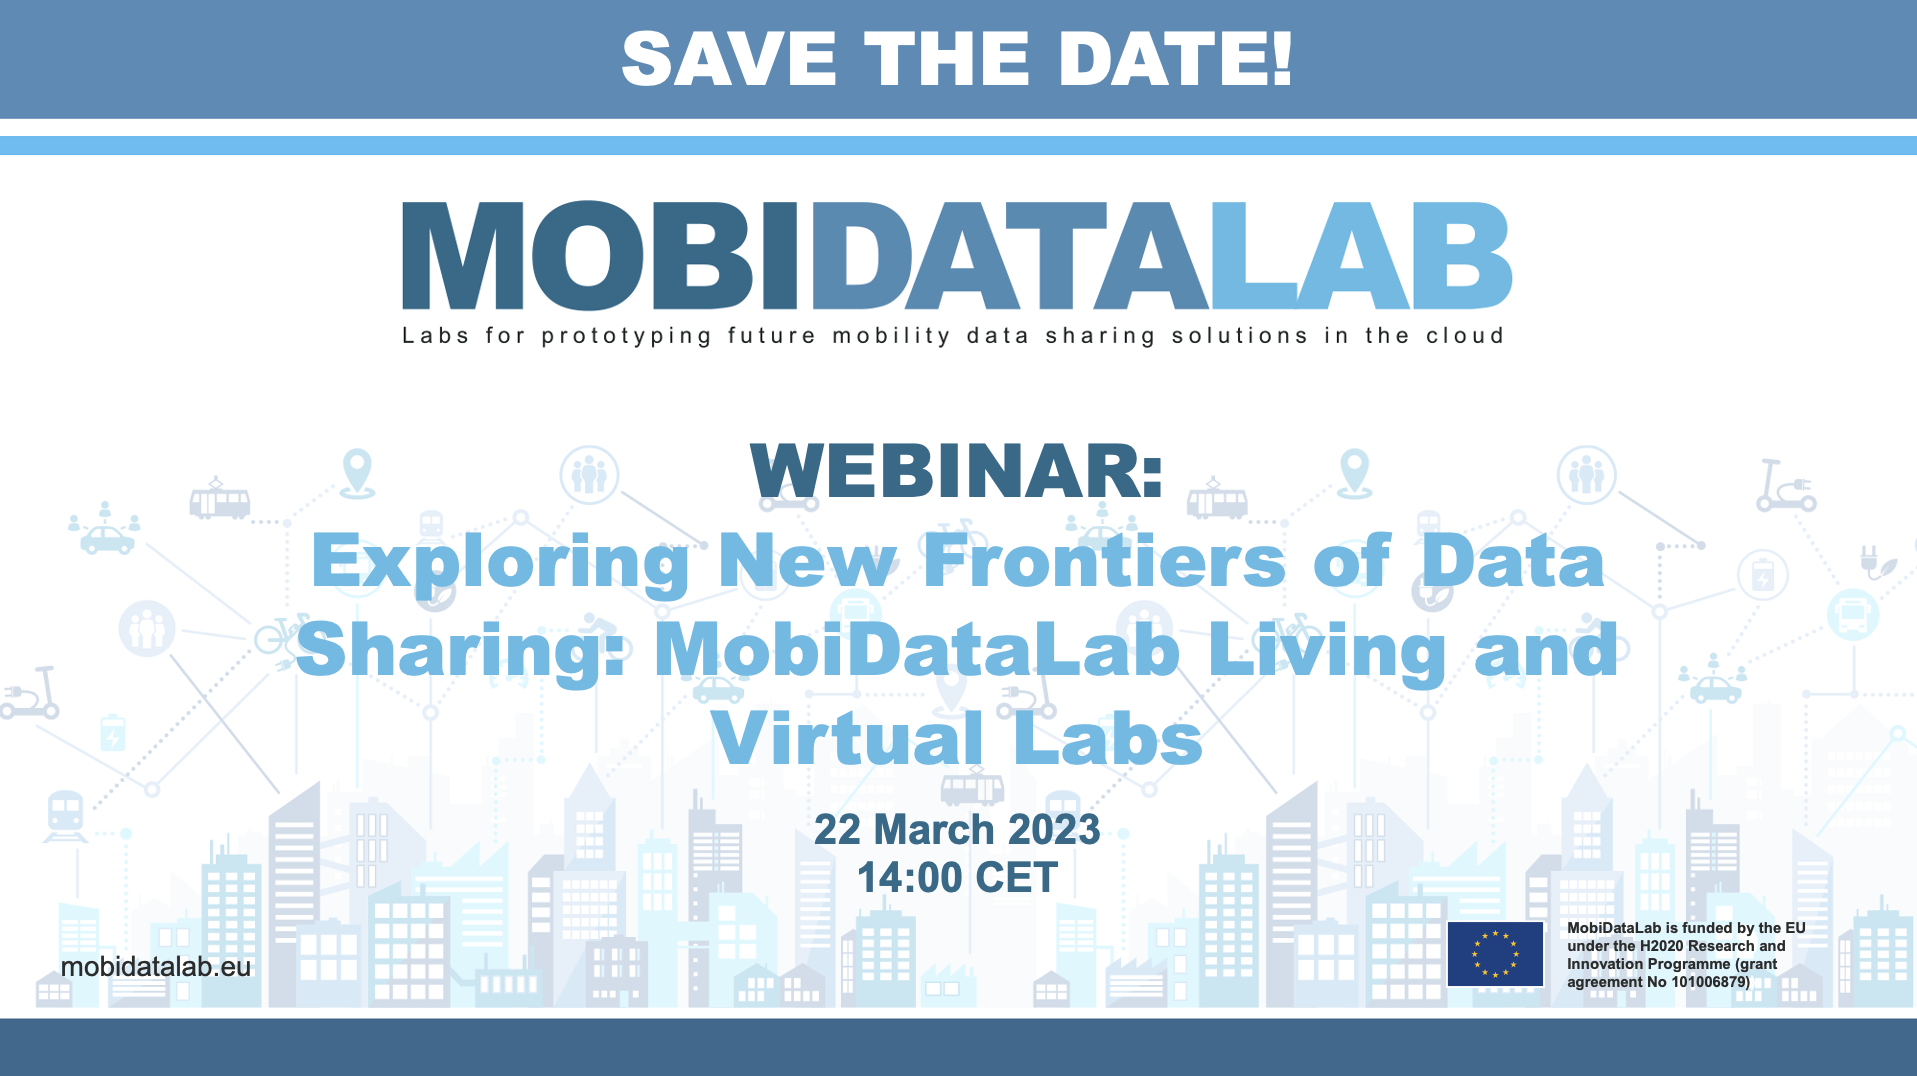 MobiDataLab 3rd Webinar: Exploring new frontiers of mobility data sharing